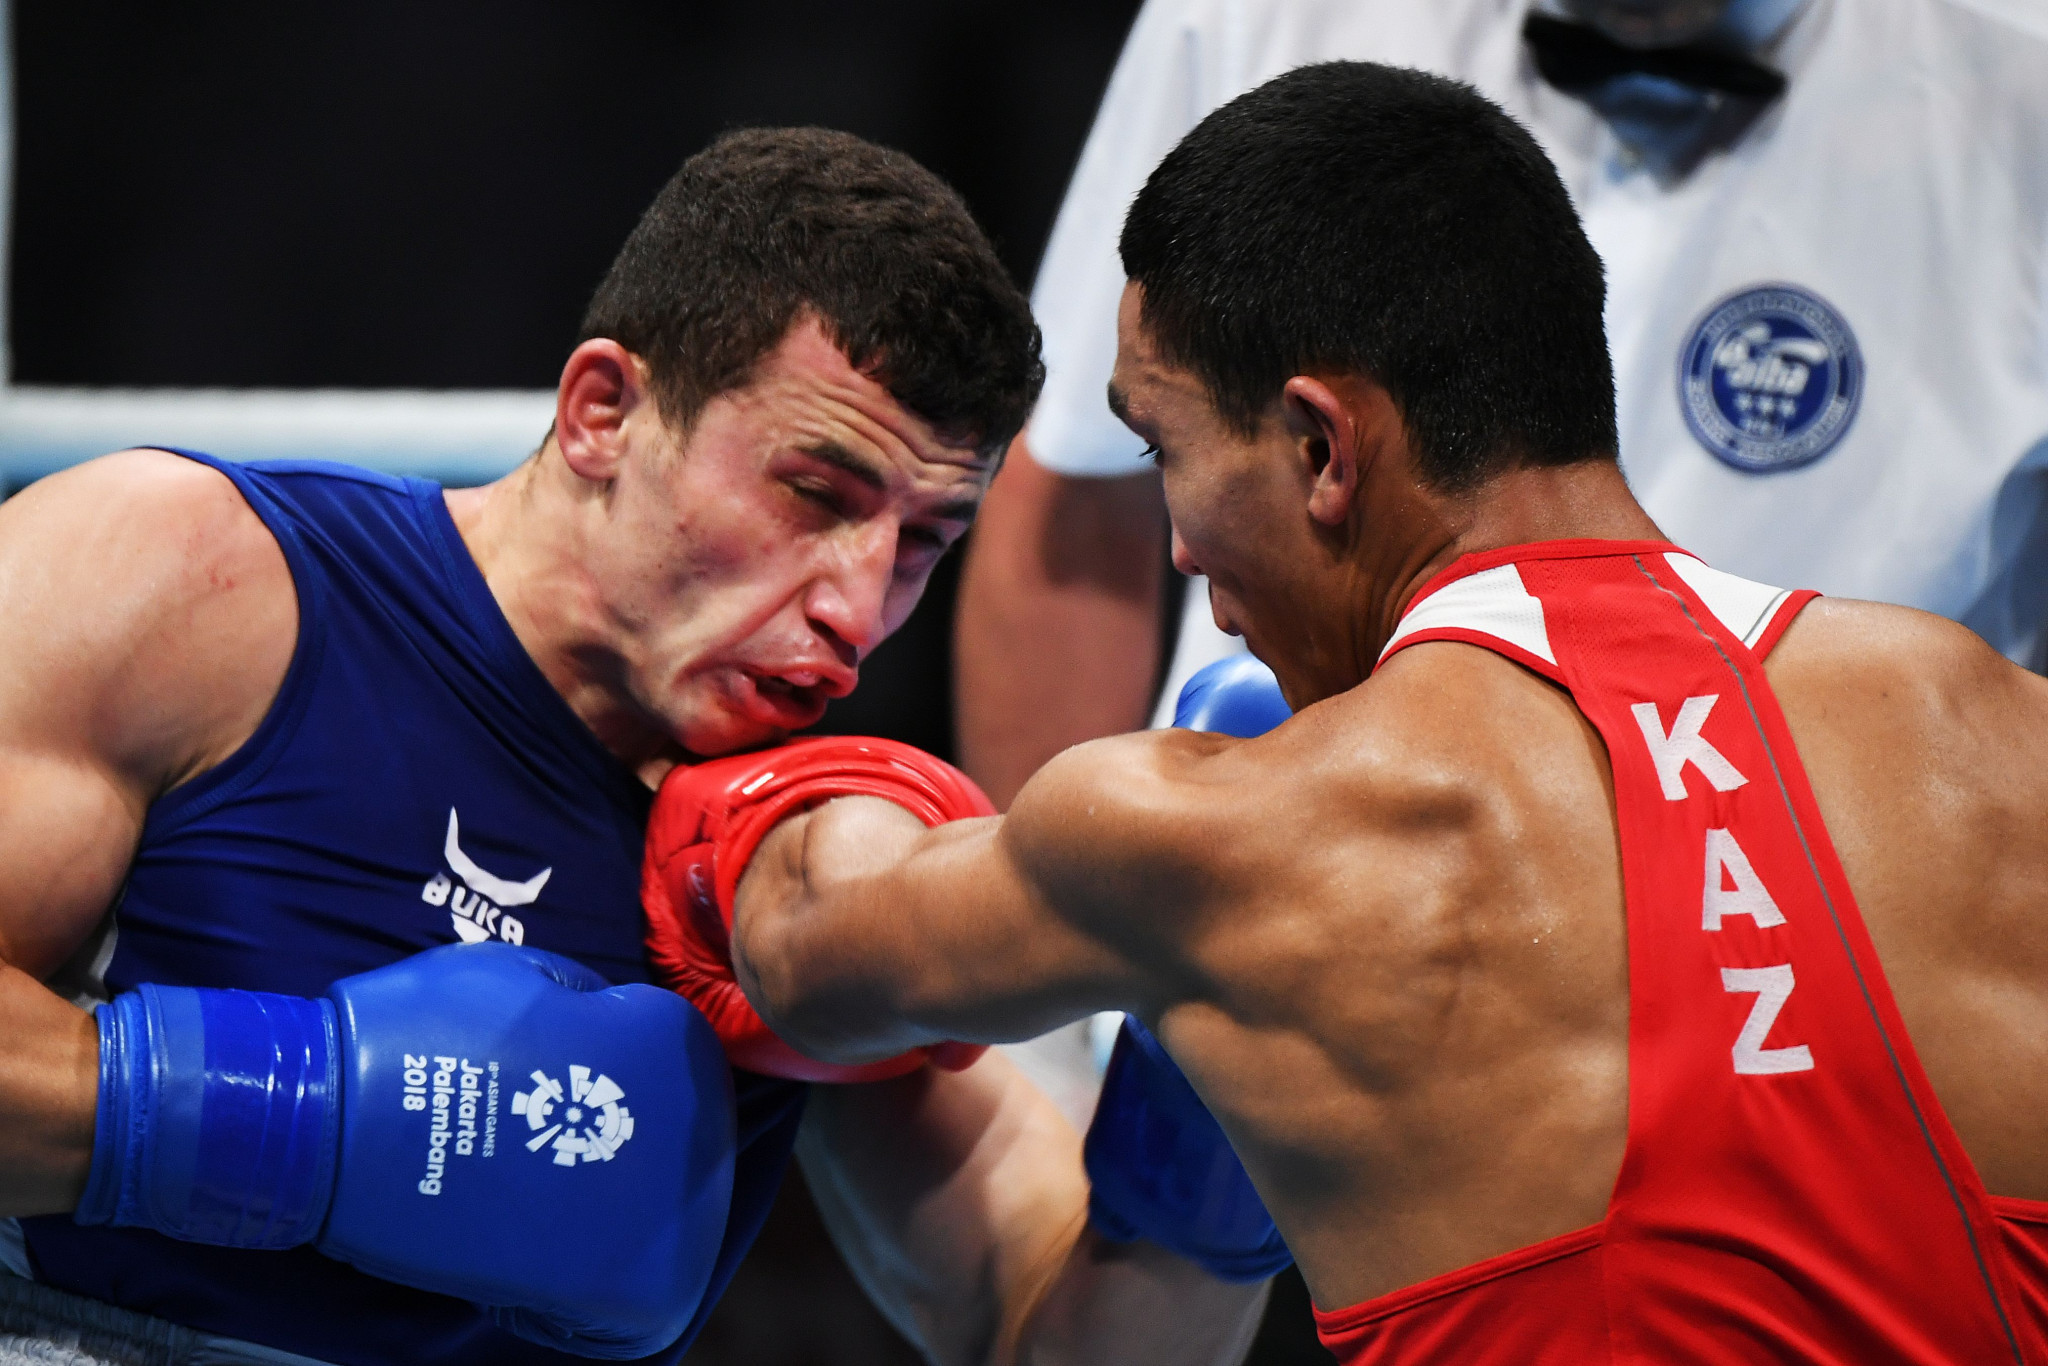 Defending champion Israil Madrimov, left, crashed out of the middleweight division after he suffered defeat to Tursynbay Kulakhmet of Kazakhstan ©Getty Images